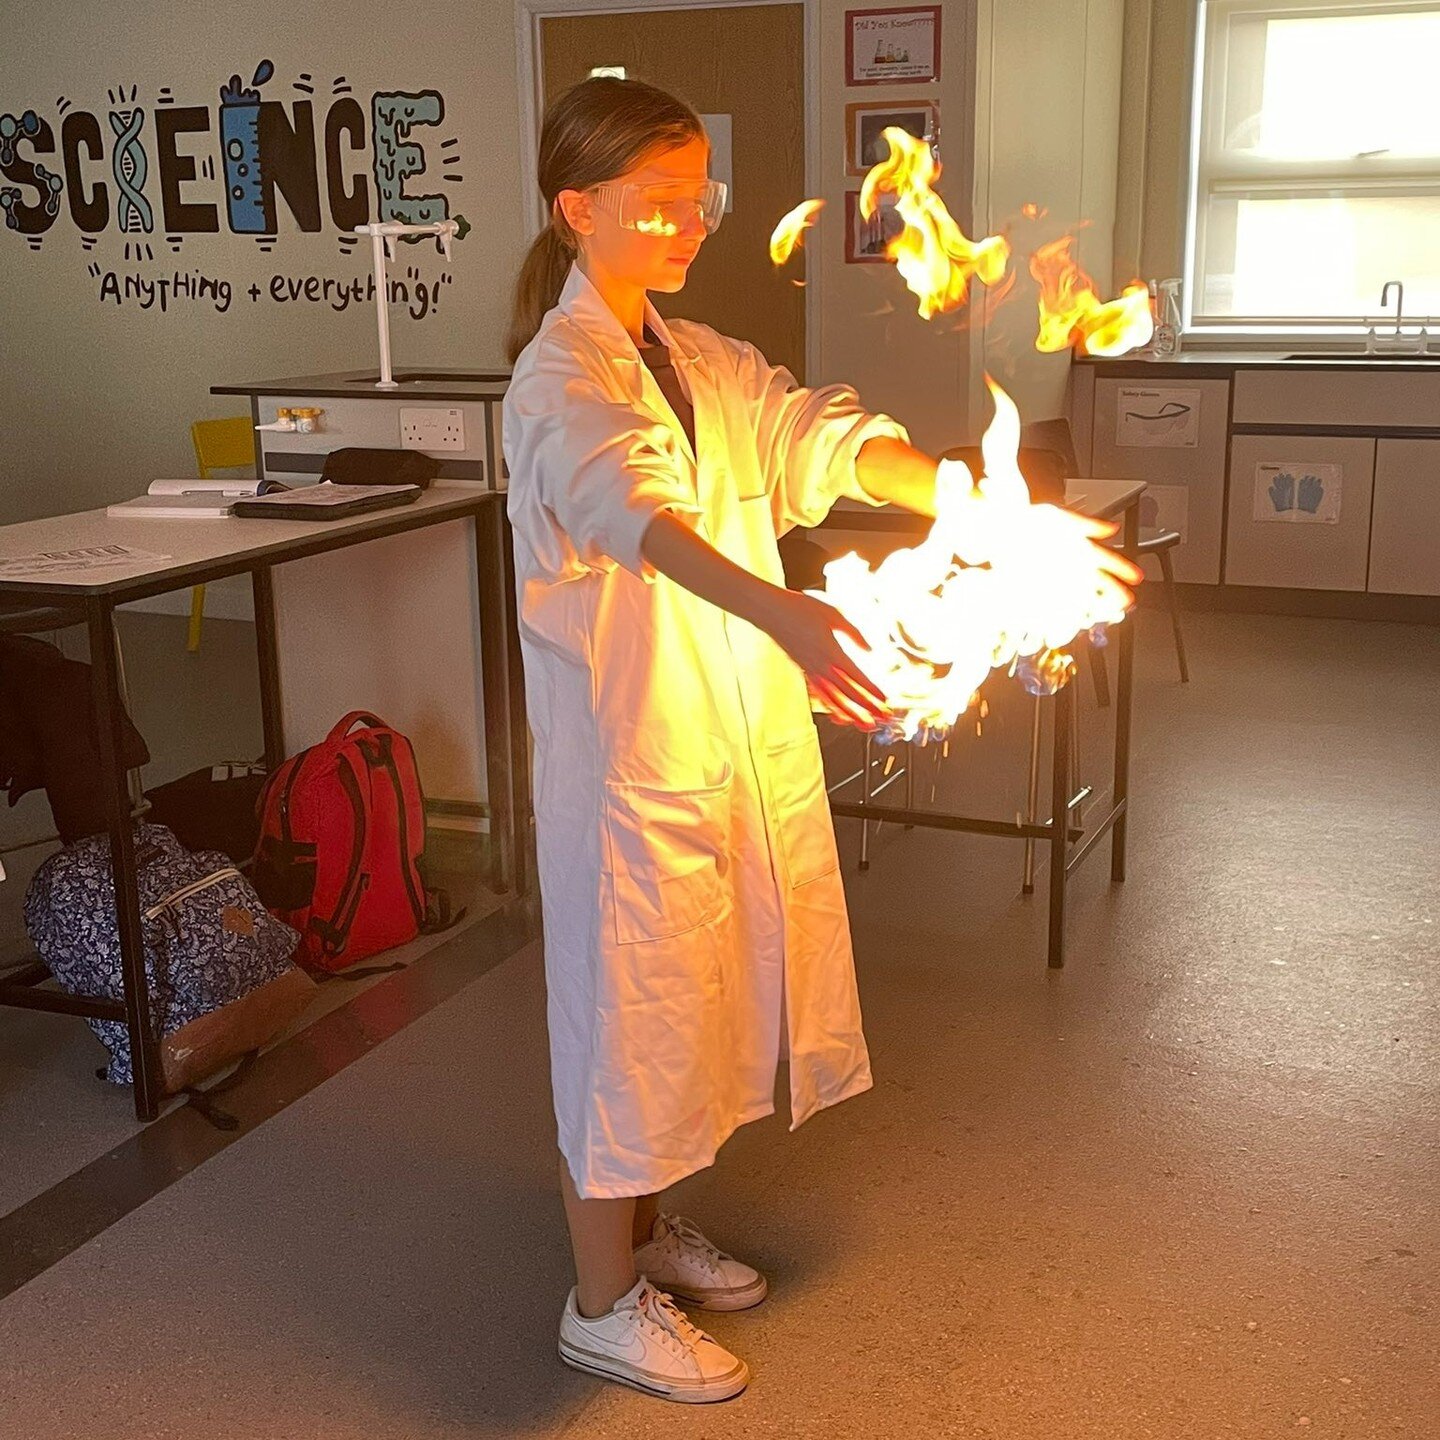 Science looking pretty amazing!